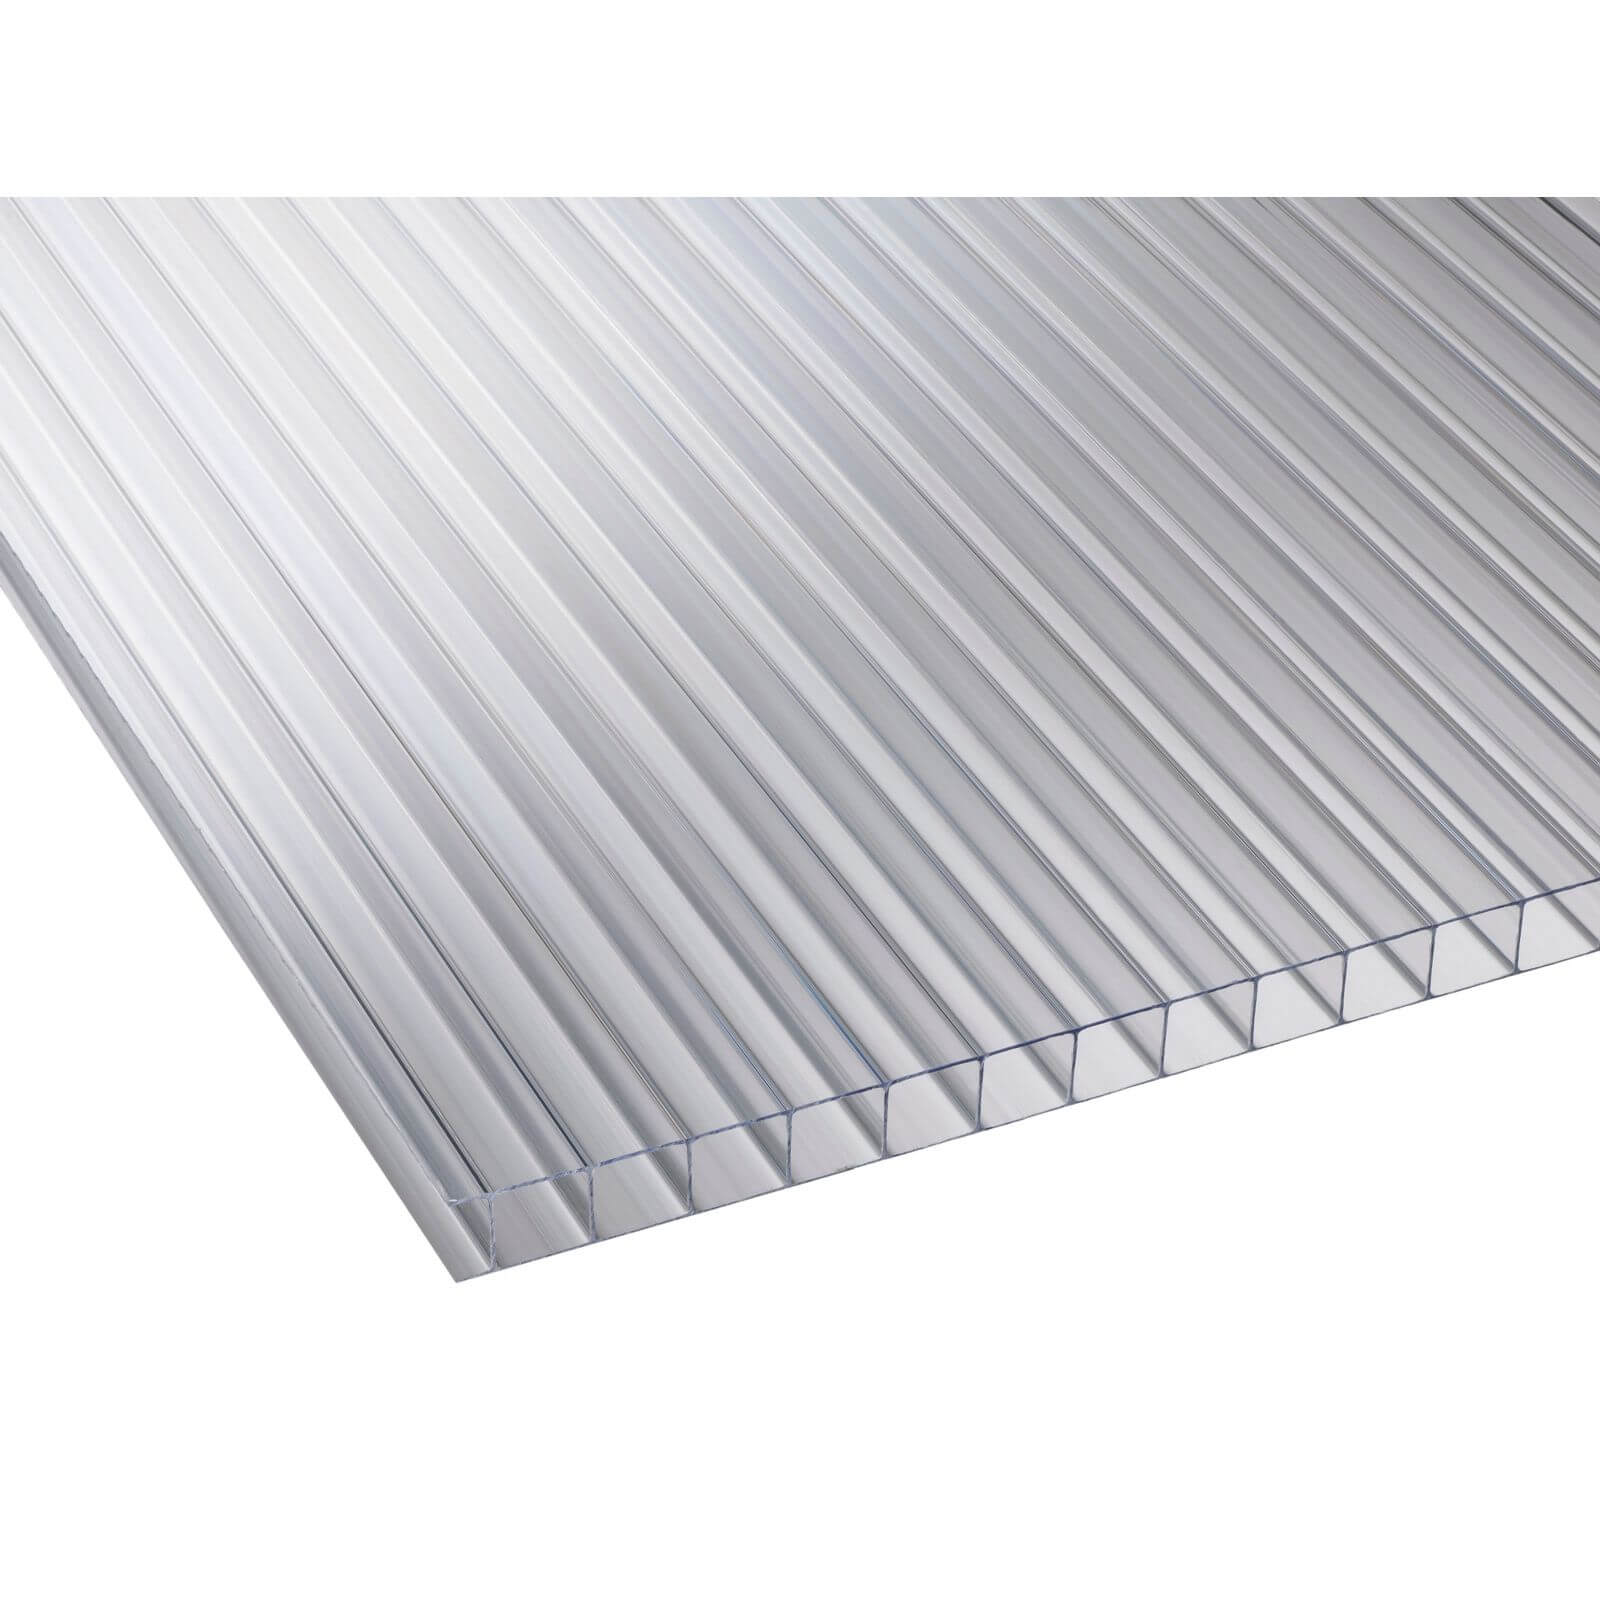 Corotherm Polycarbonate Roofing Sheet 2500 x 700 x 10mm